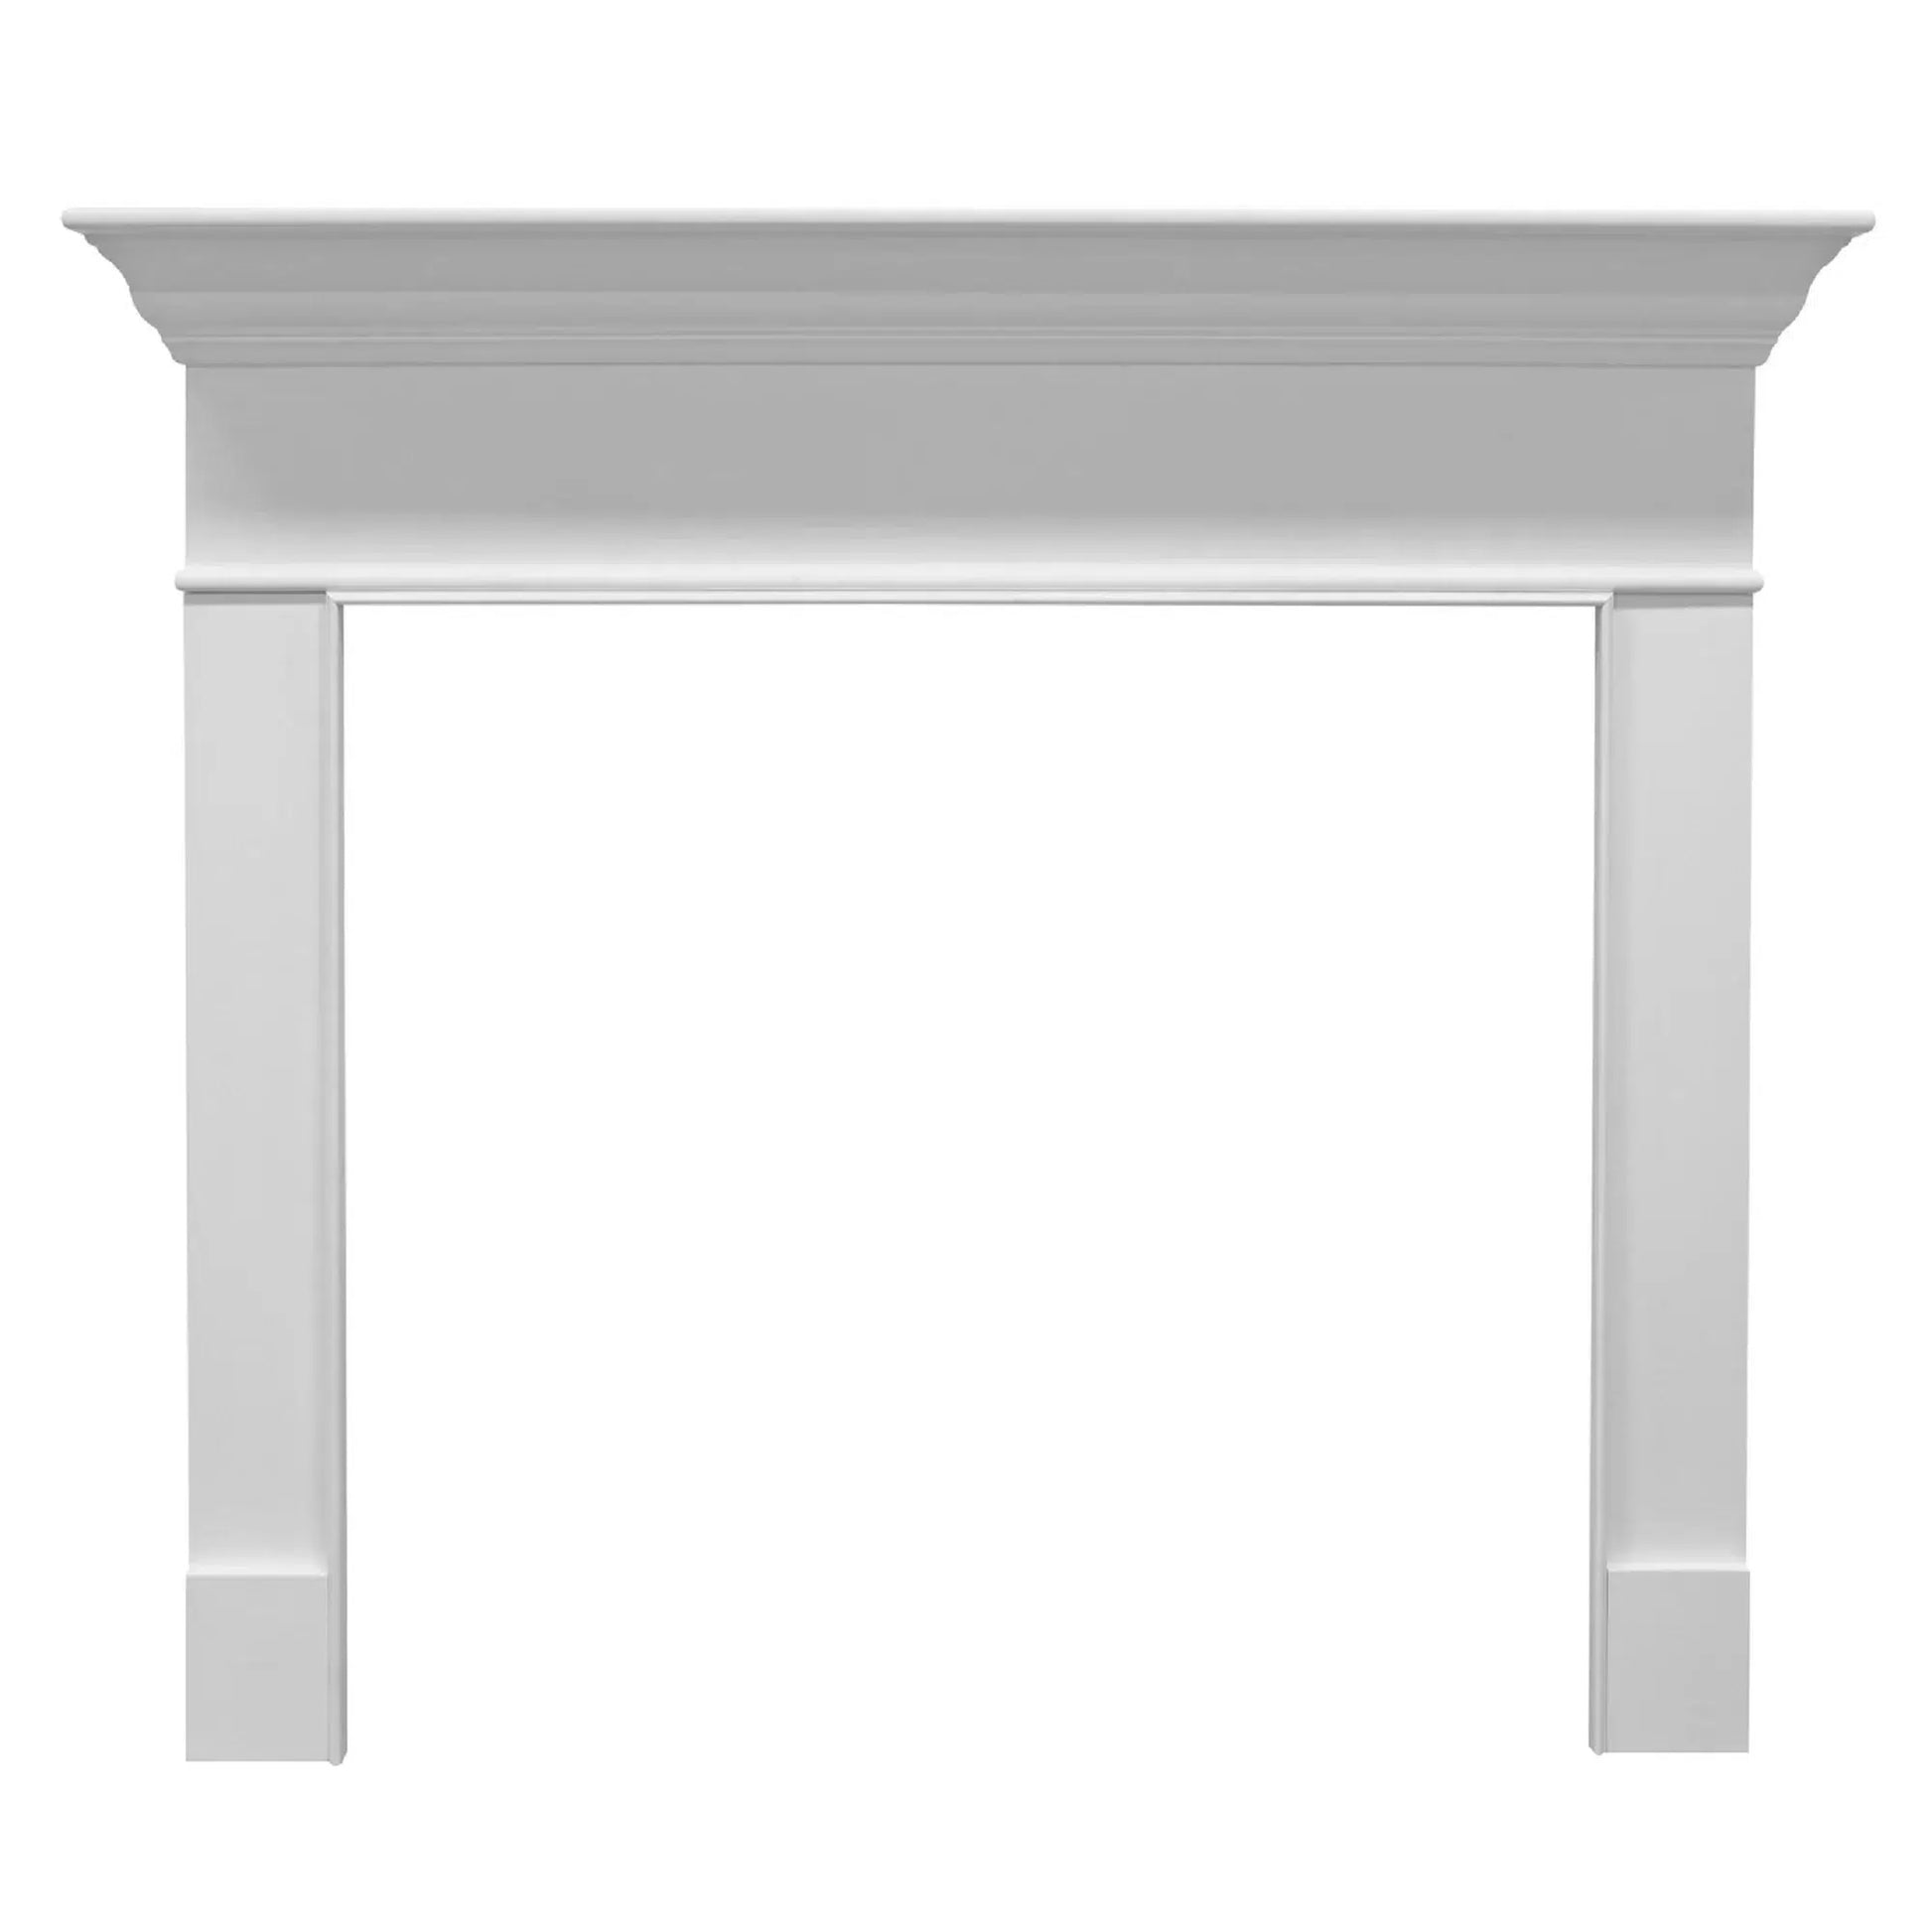 Majestic Select Series Wescott A 44" Primed MDF Transitional Style Flush Wood Fireplace Mantel